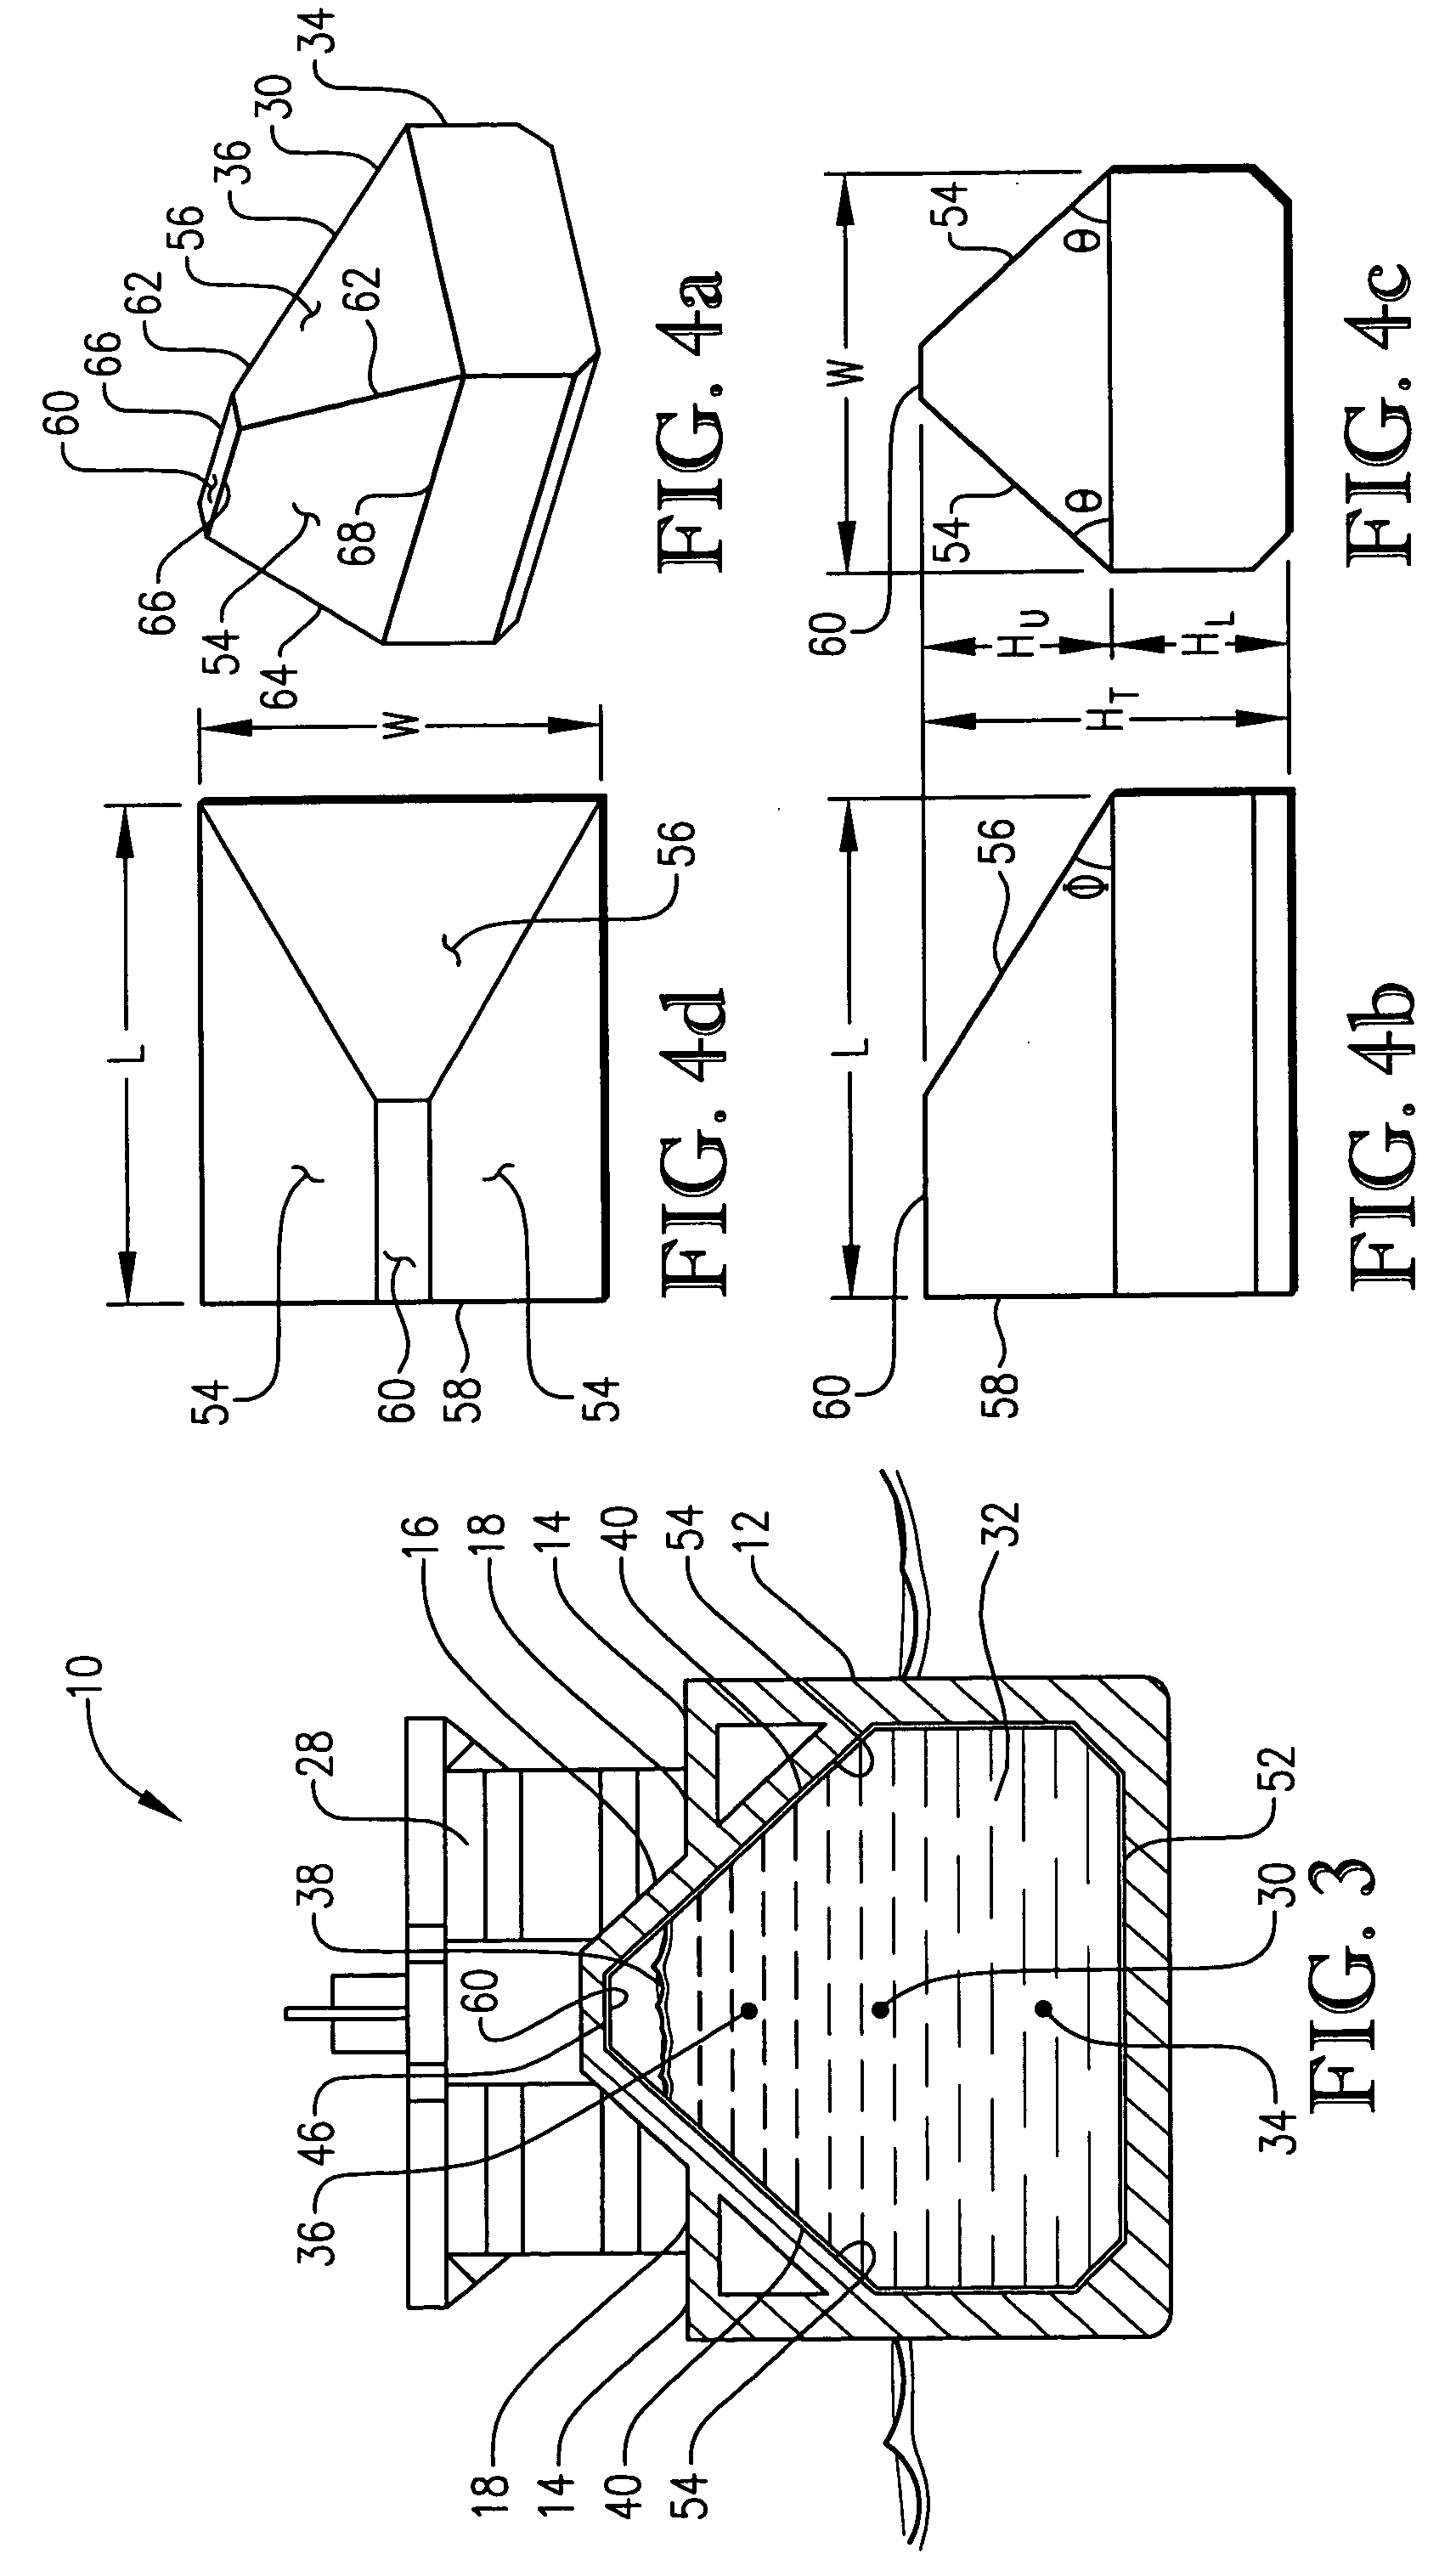 High volume liquid containment system for ships